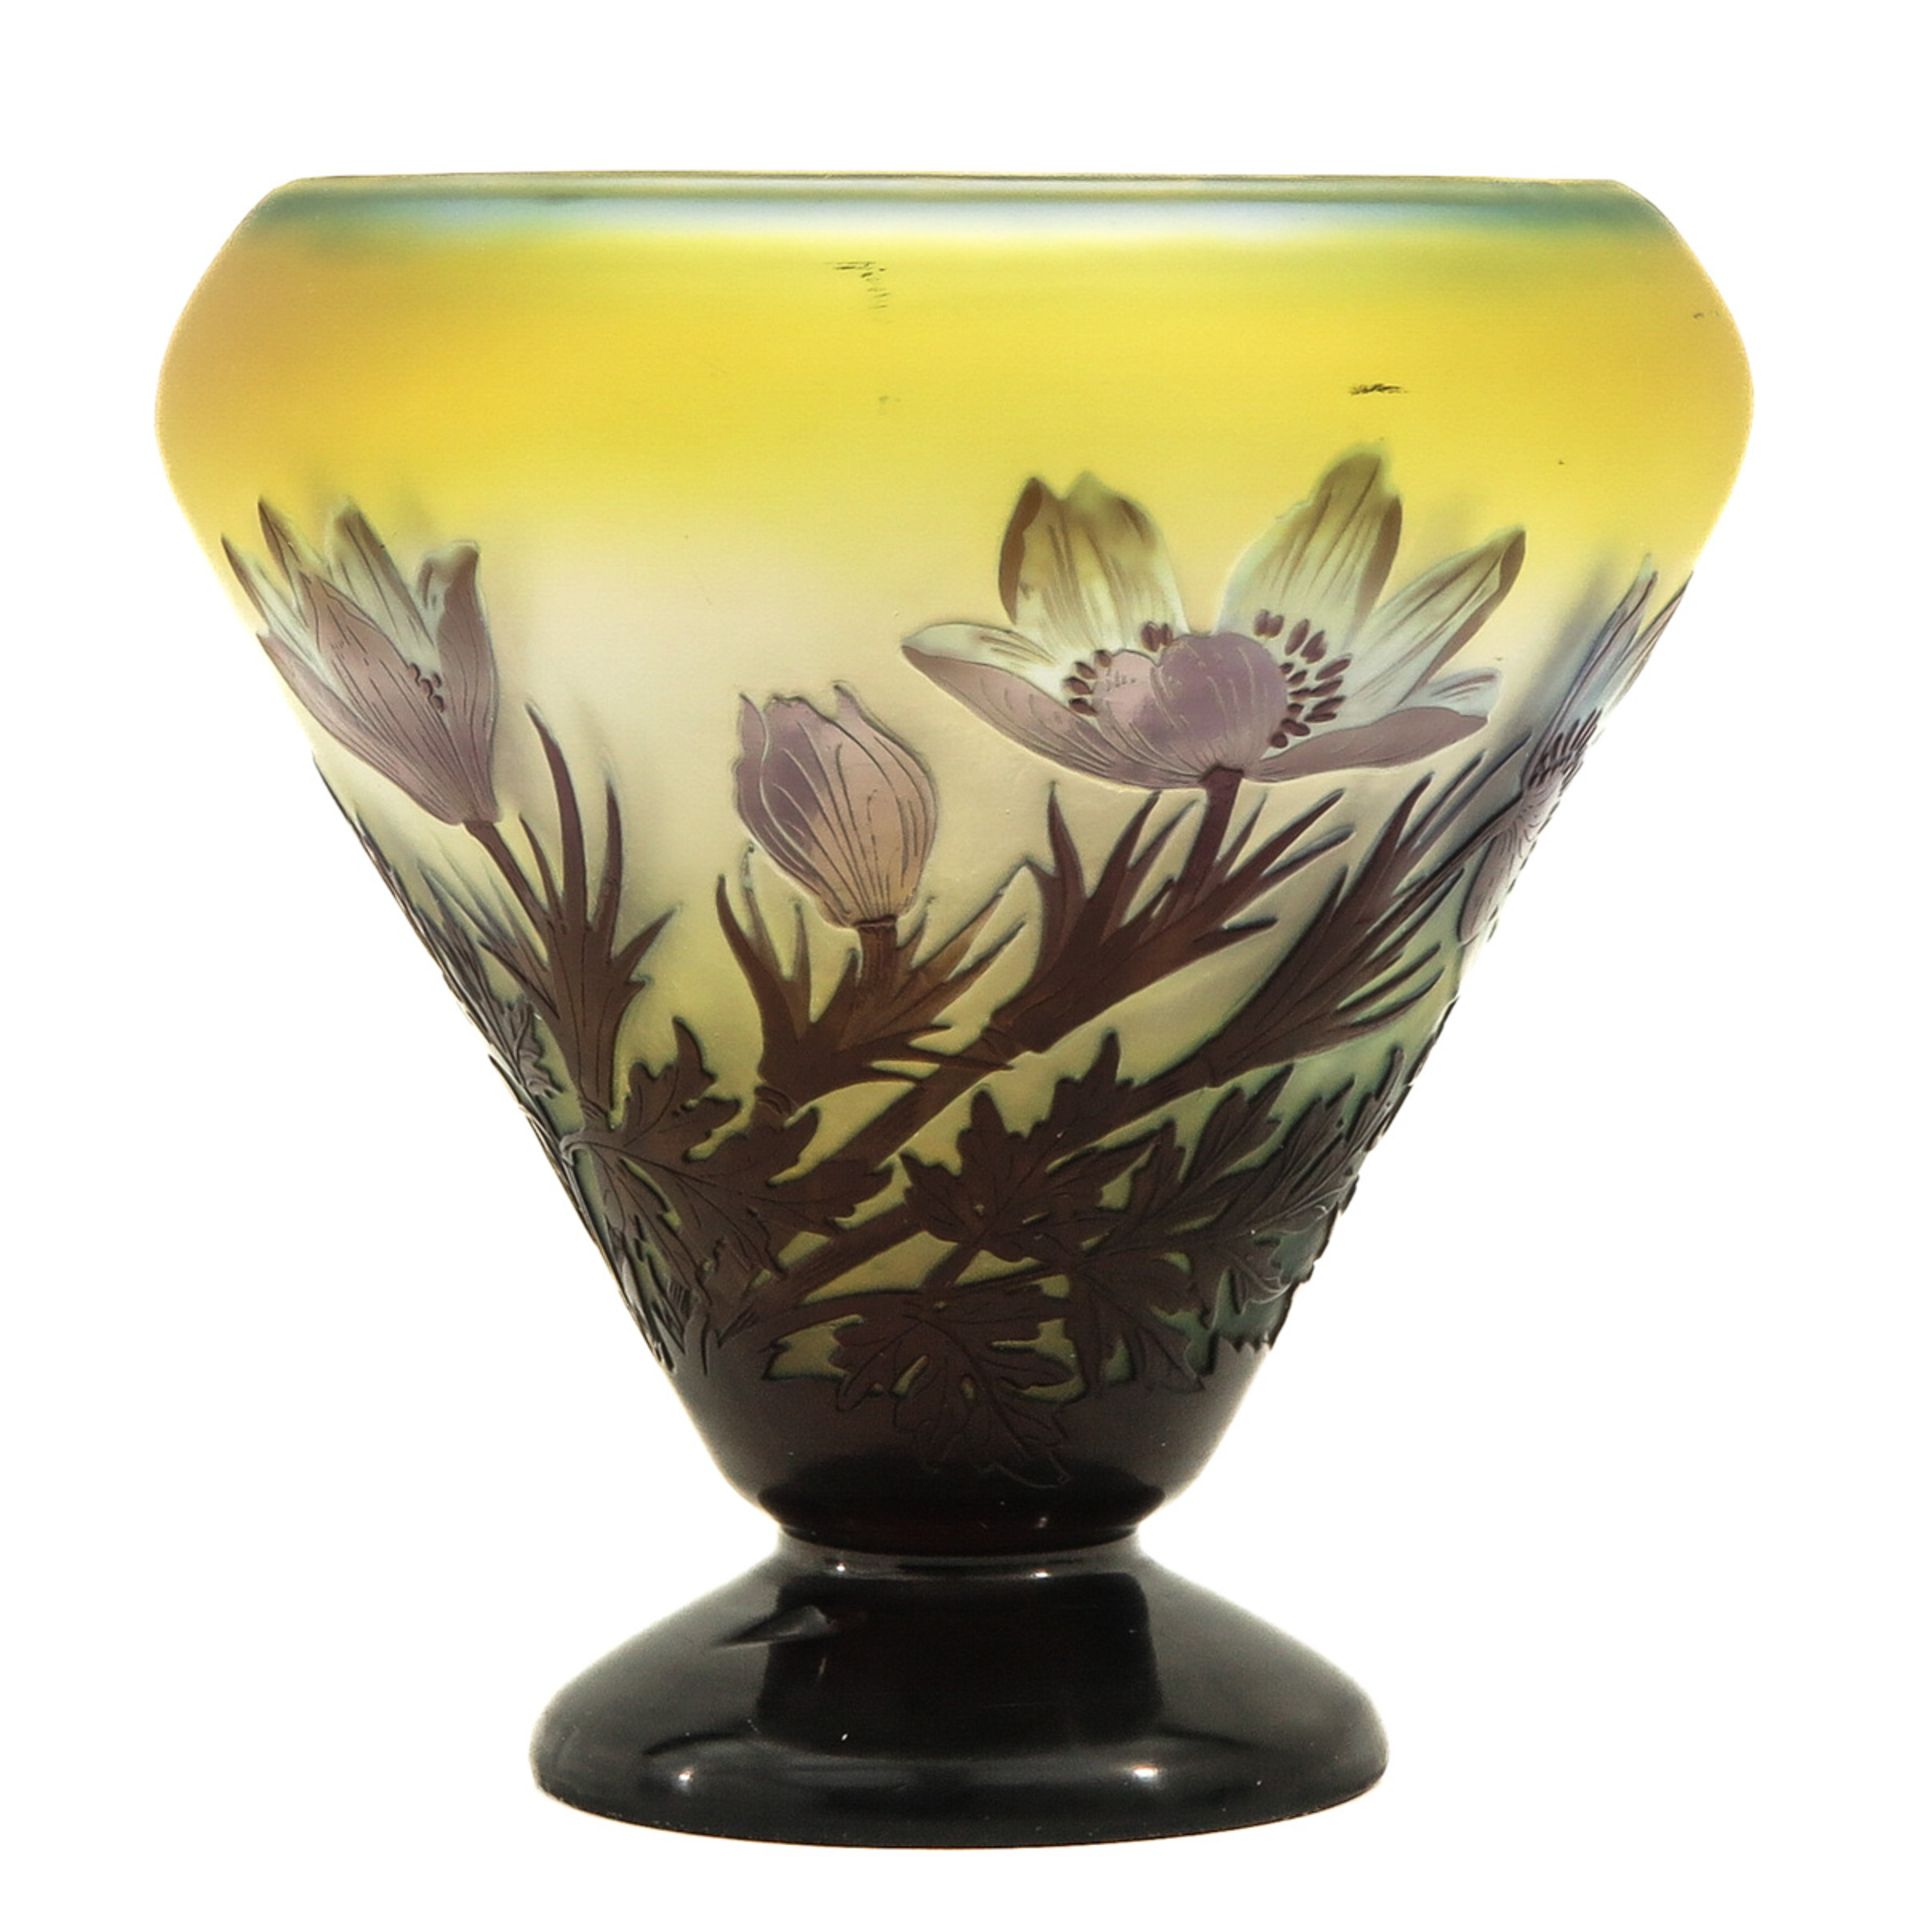 A Signed Galle Vase - Image 4 of 8